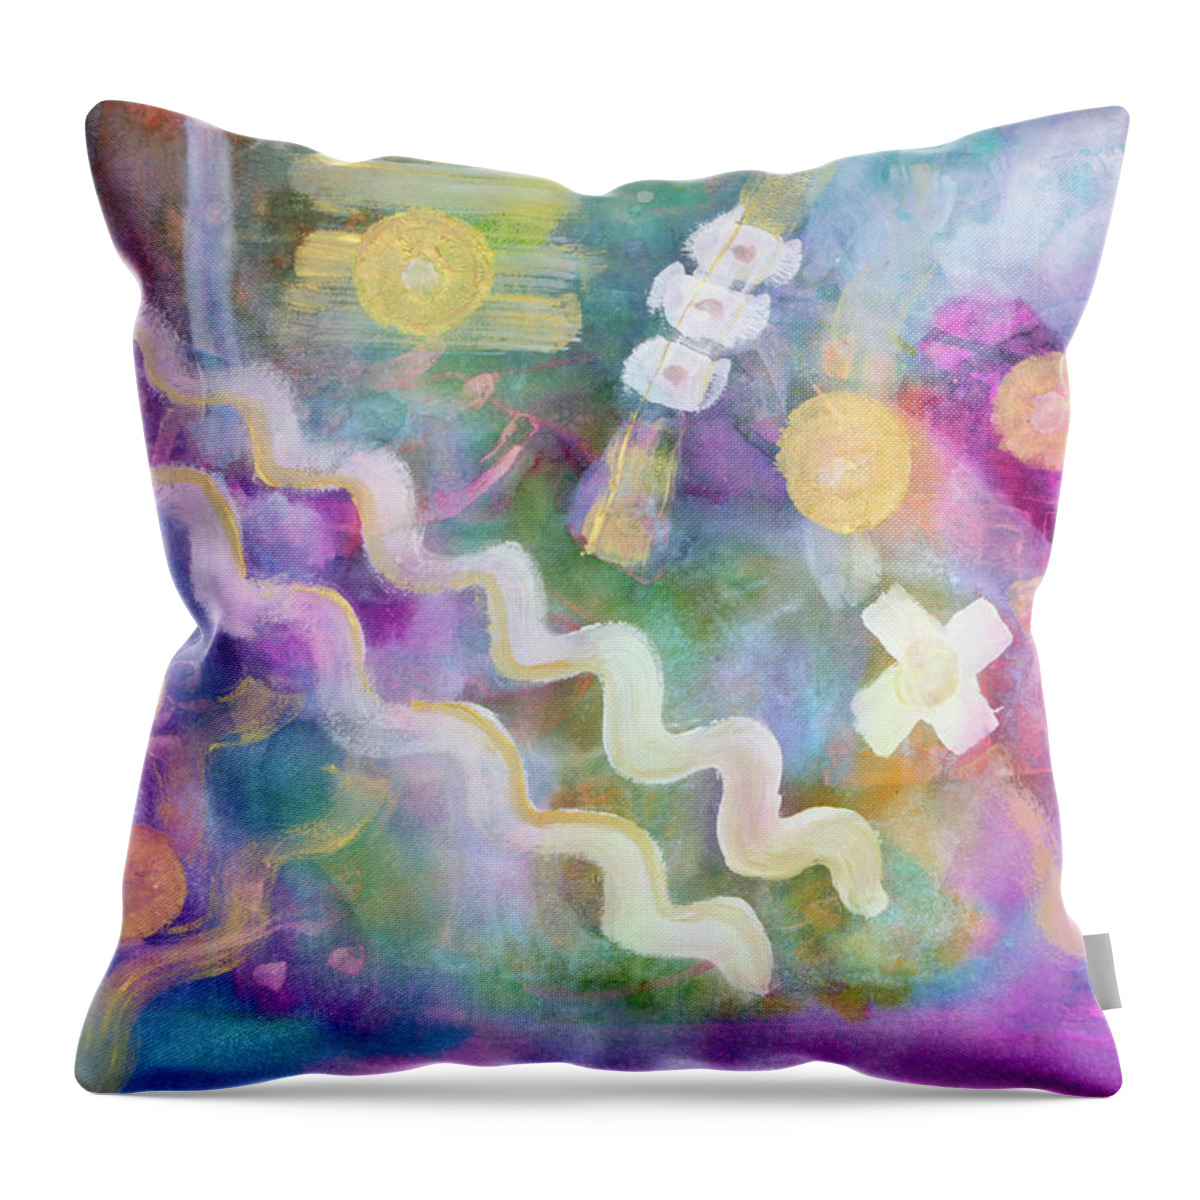 Symbolic Art Throw Pillow featuring the digital art Symbolic Art by Don Wright